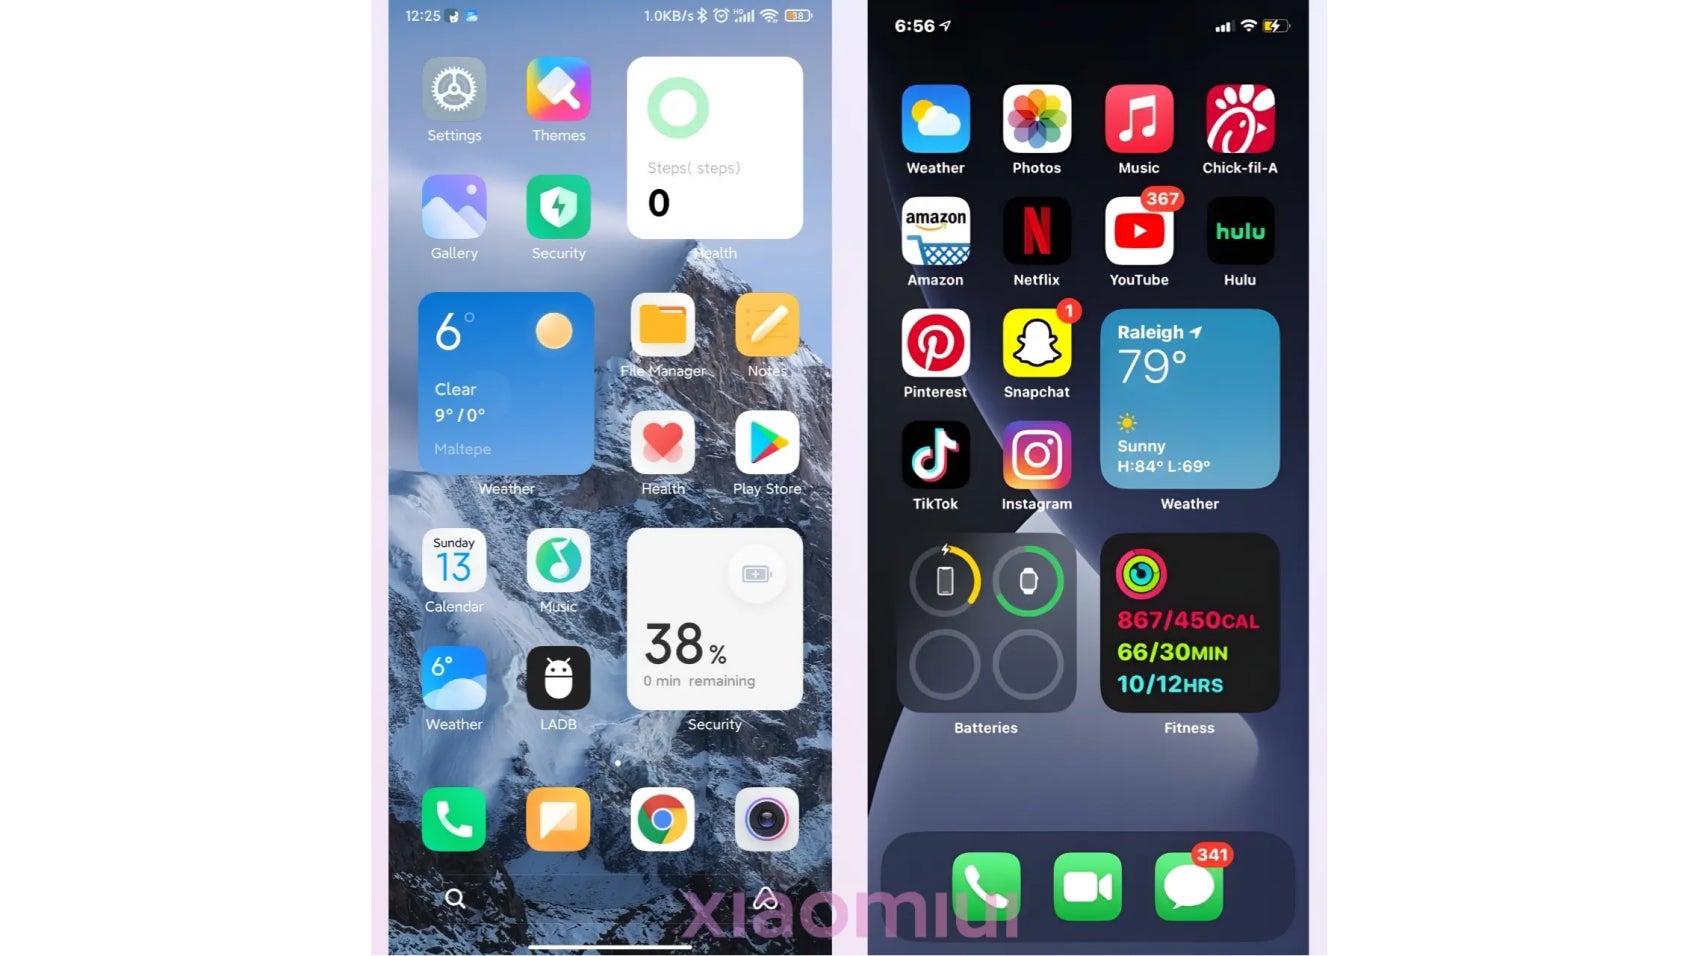 Xiaomi has always valued Apple's iOS, and it shows... - Xiaomi 12S Ultra: from iPhone clone to world power - Student becomes a master?